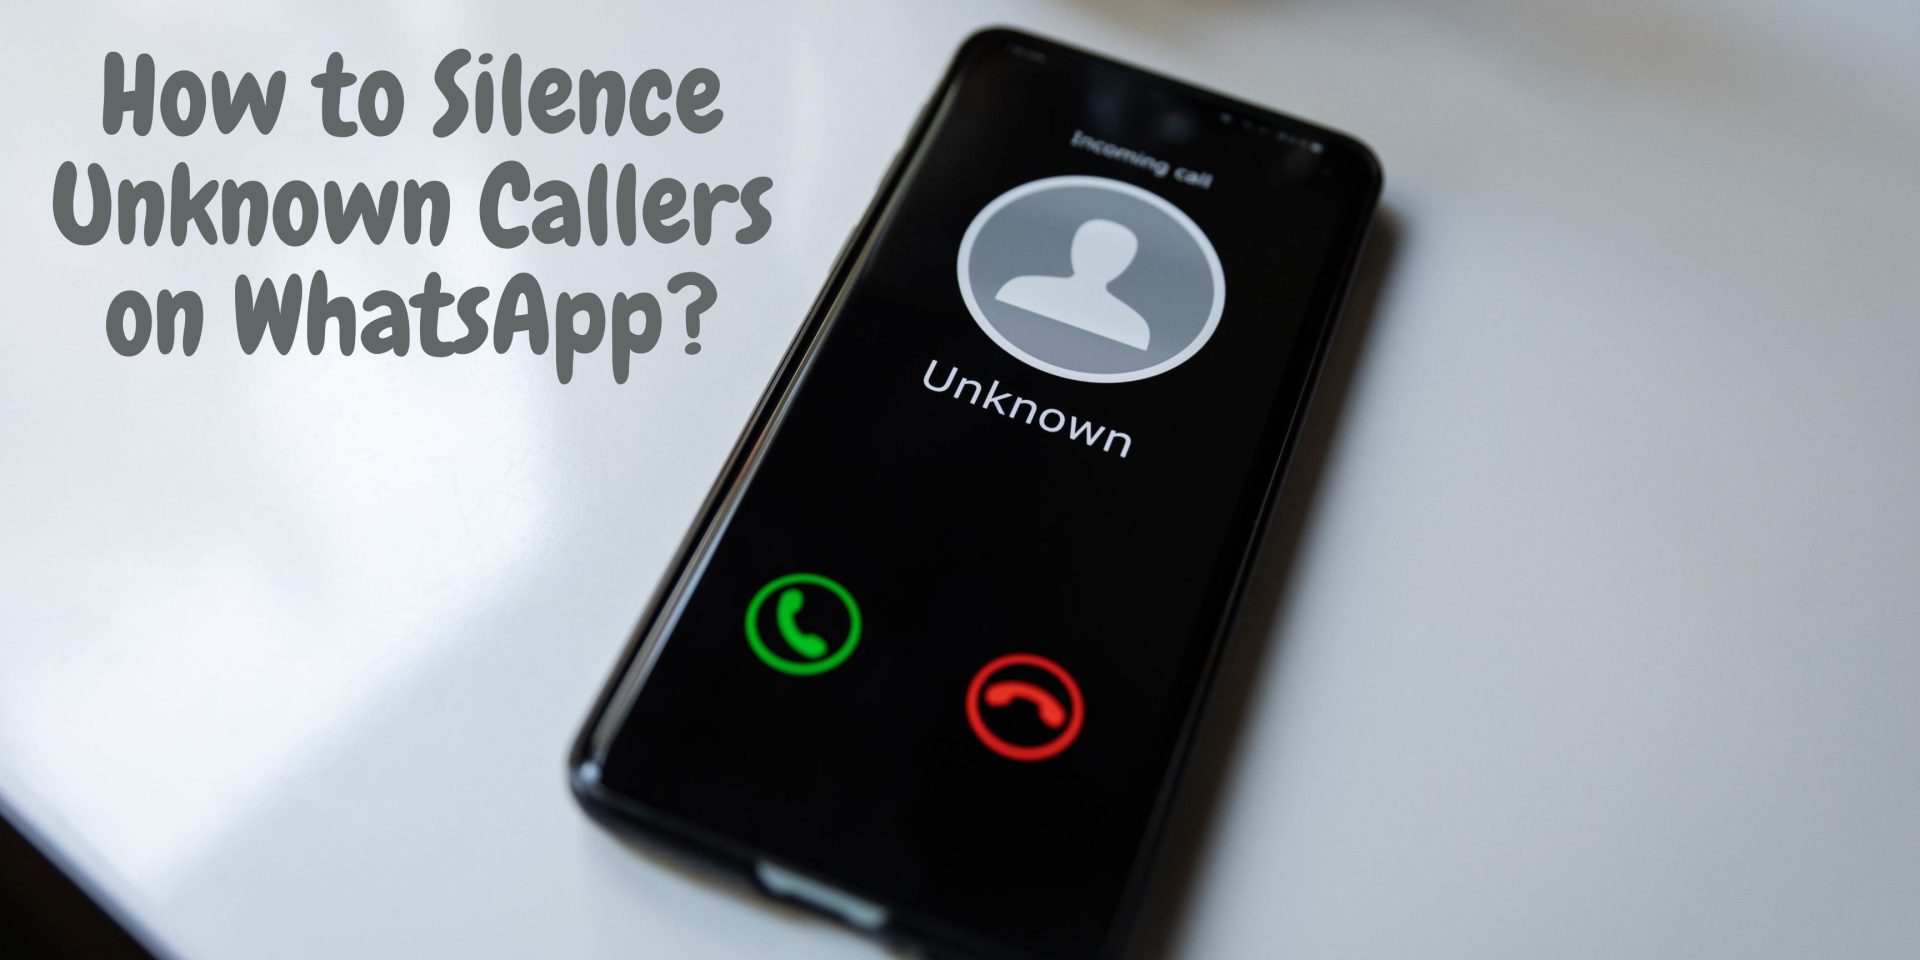 Unknown Callers